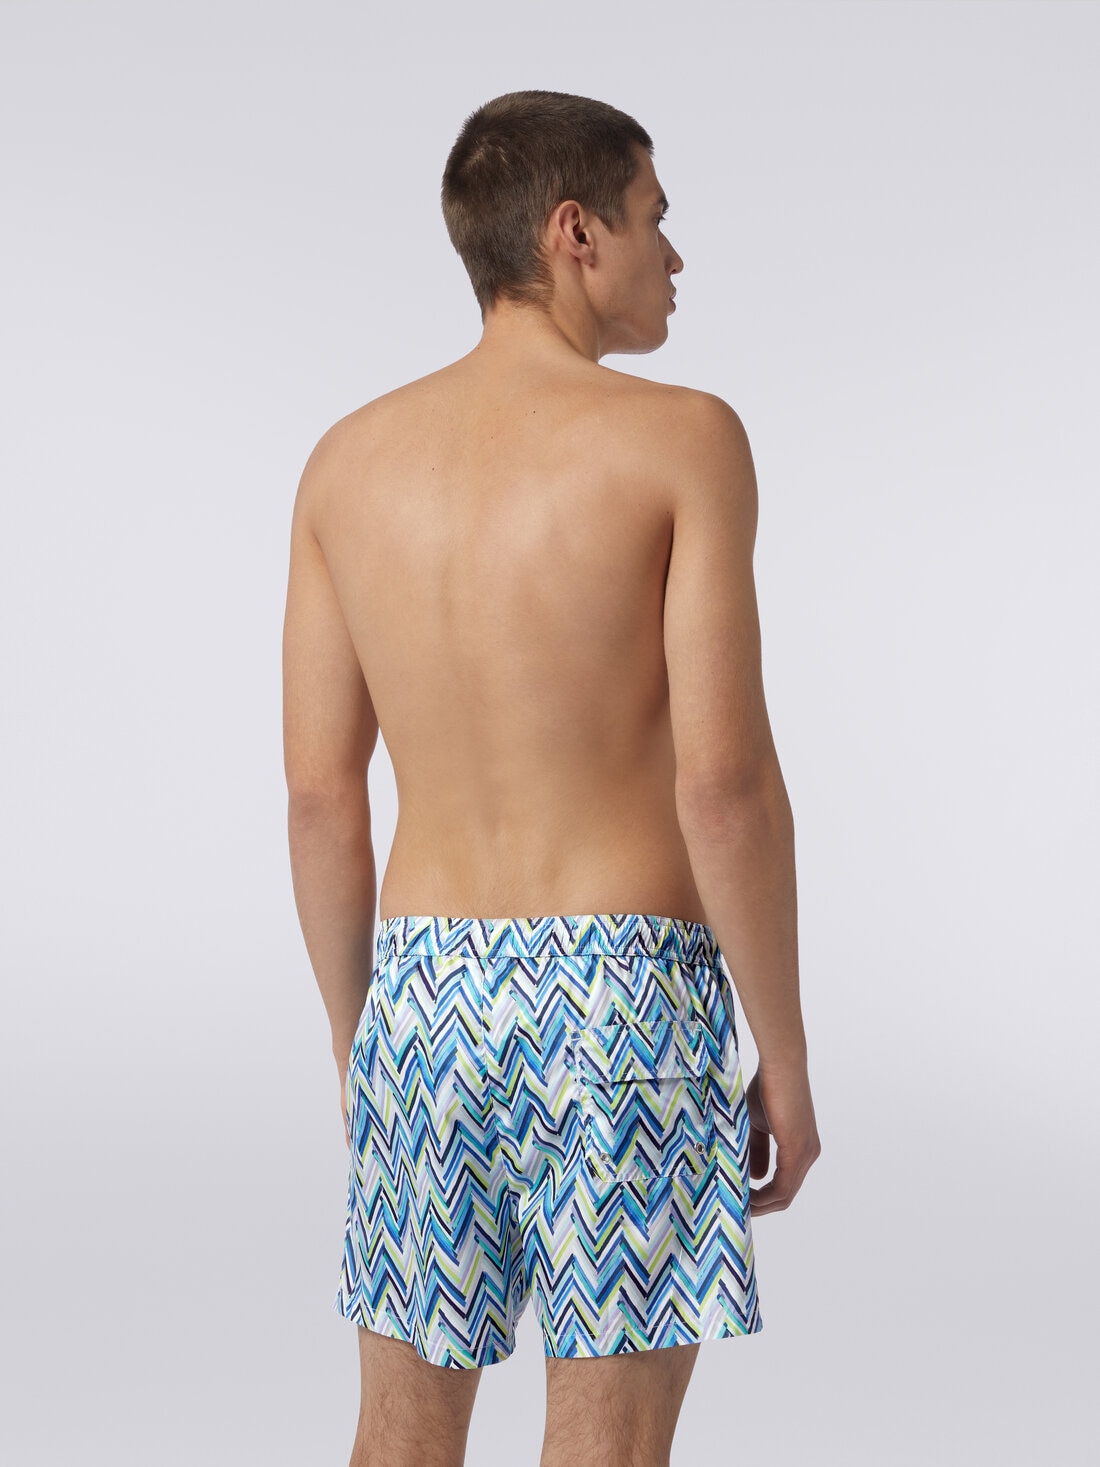 Swimming trunks with brushstroke effect zigzag print, Multicoloured  - US24SP00BW00S1SM994 - 3